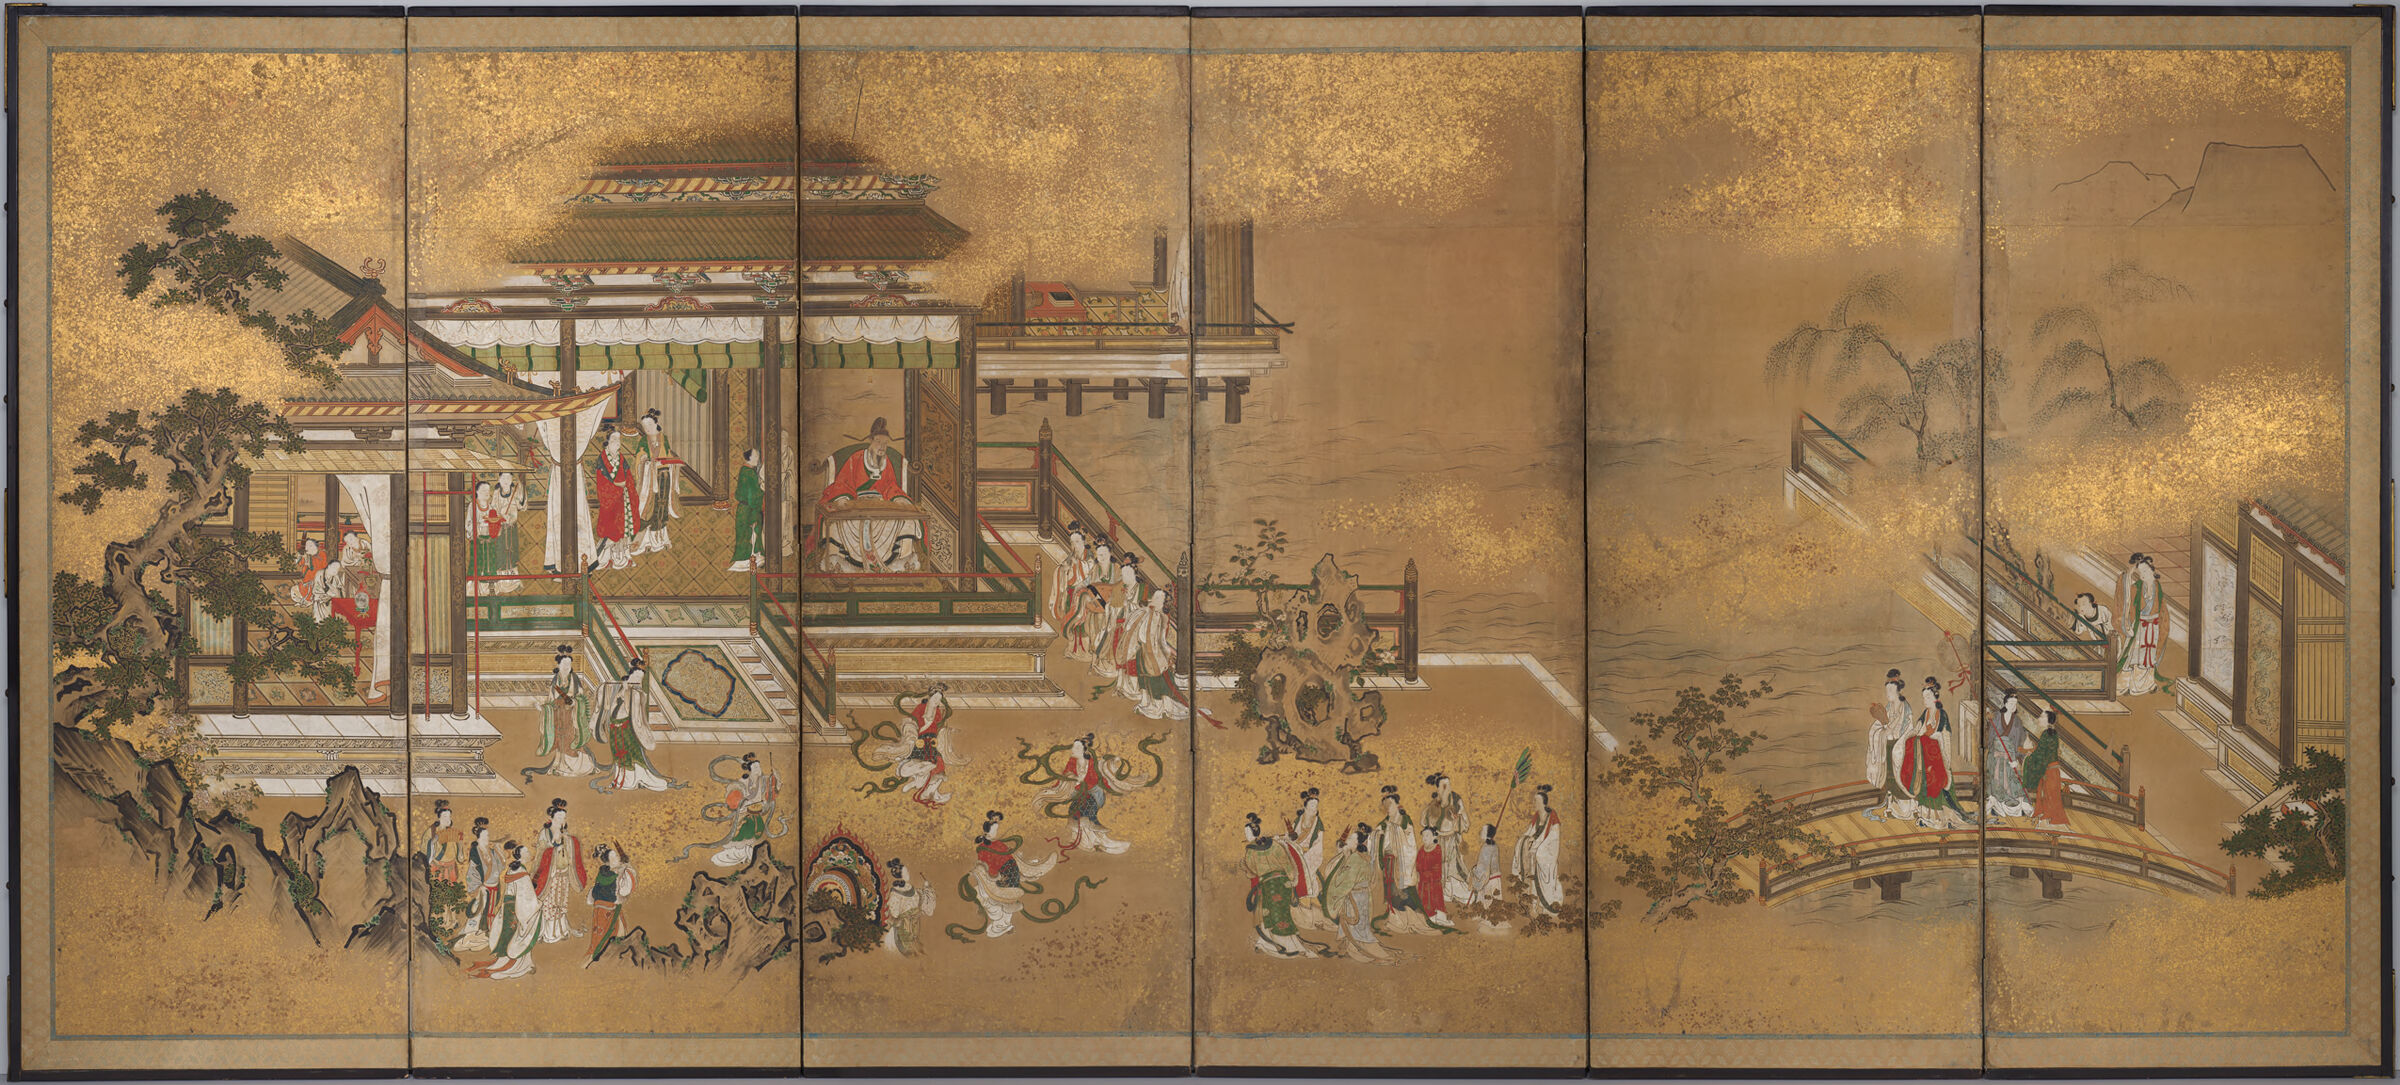 Illustrated Mirror Of Emperors And Song Of Everlasting Sorrow (Left)